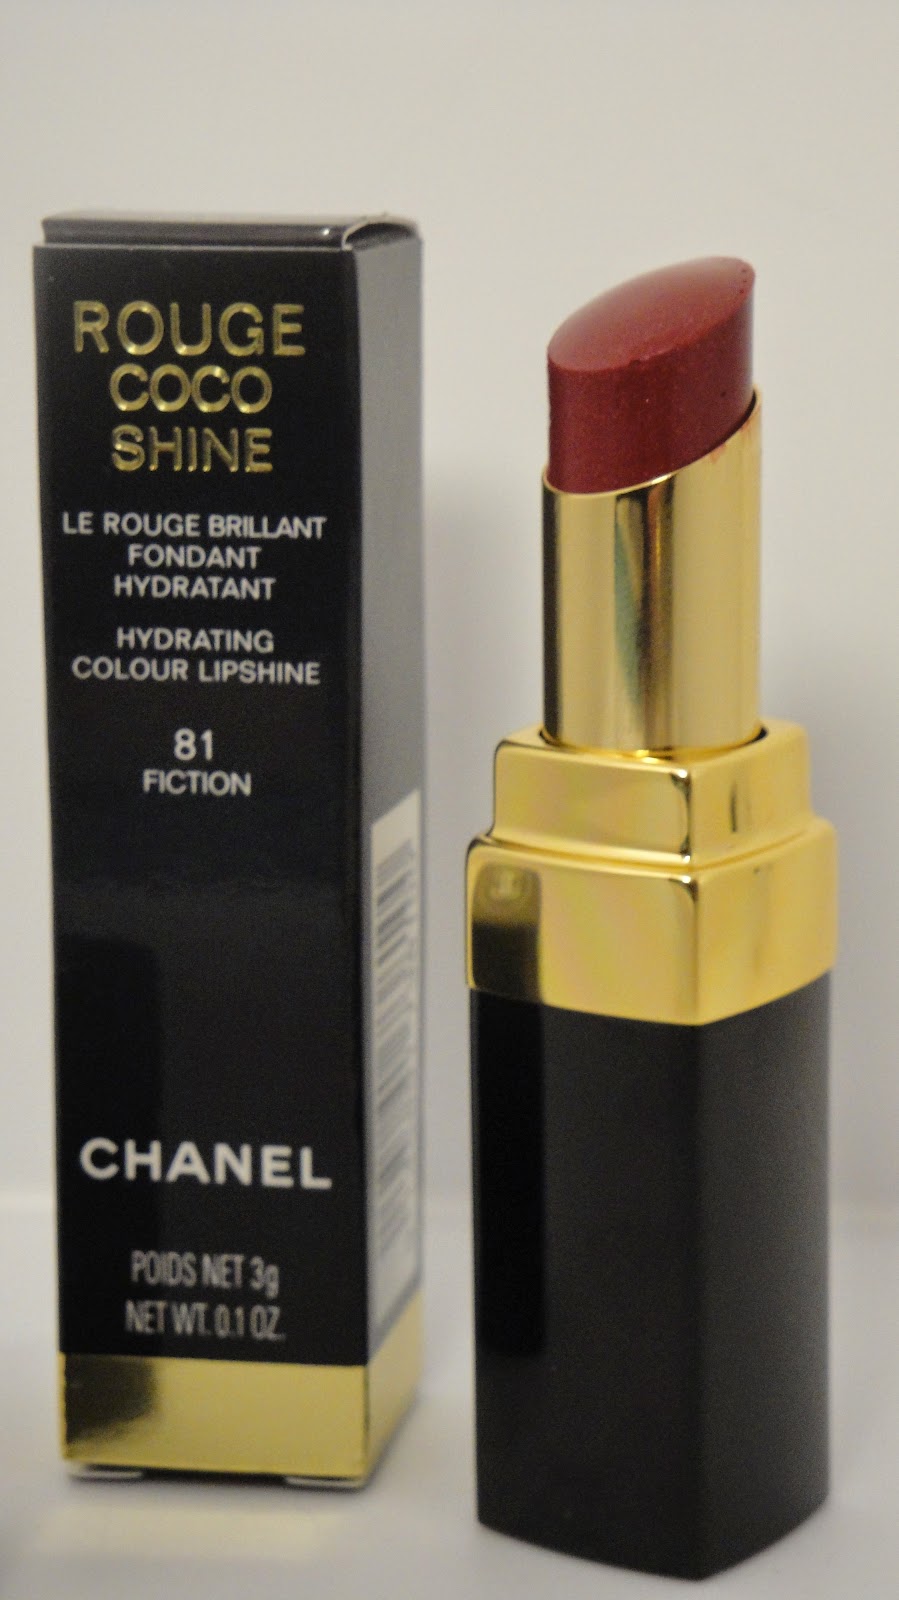 Jayded Dreaming Beauty Blog : 81 FICTION CHANEL ROUGE COCO SHINE